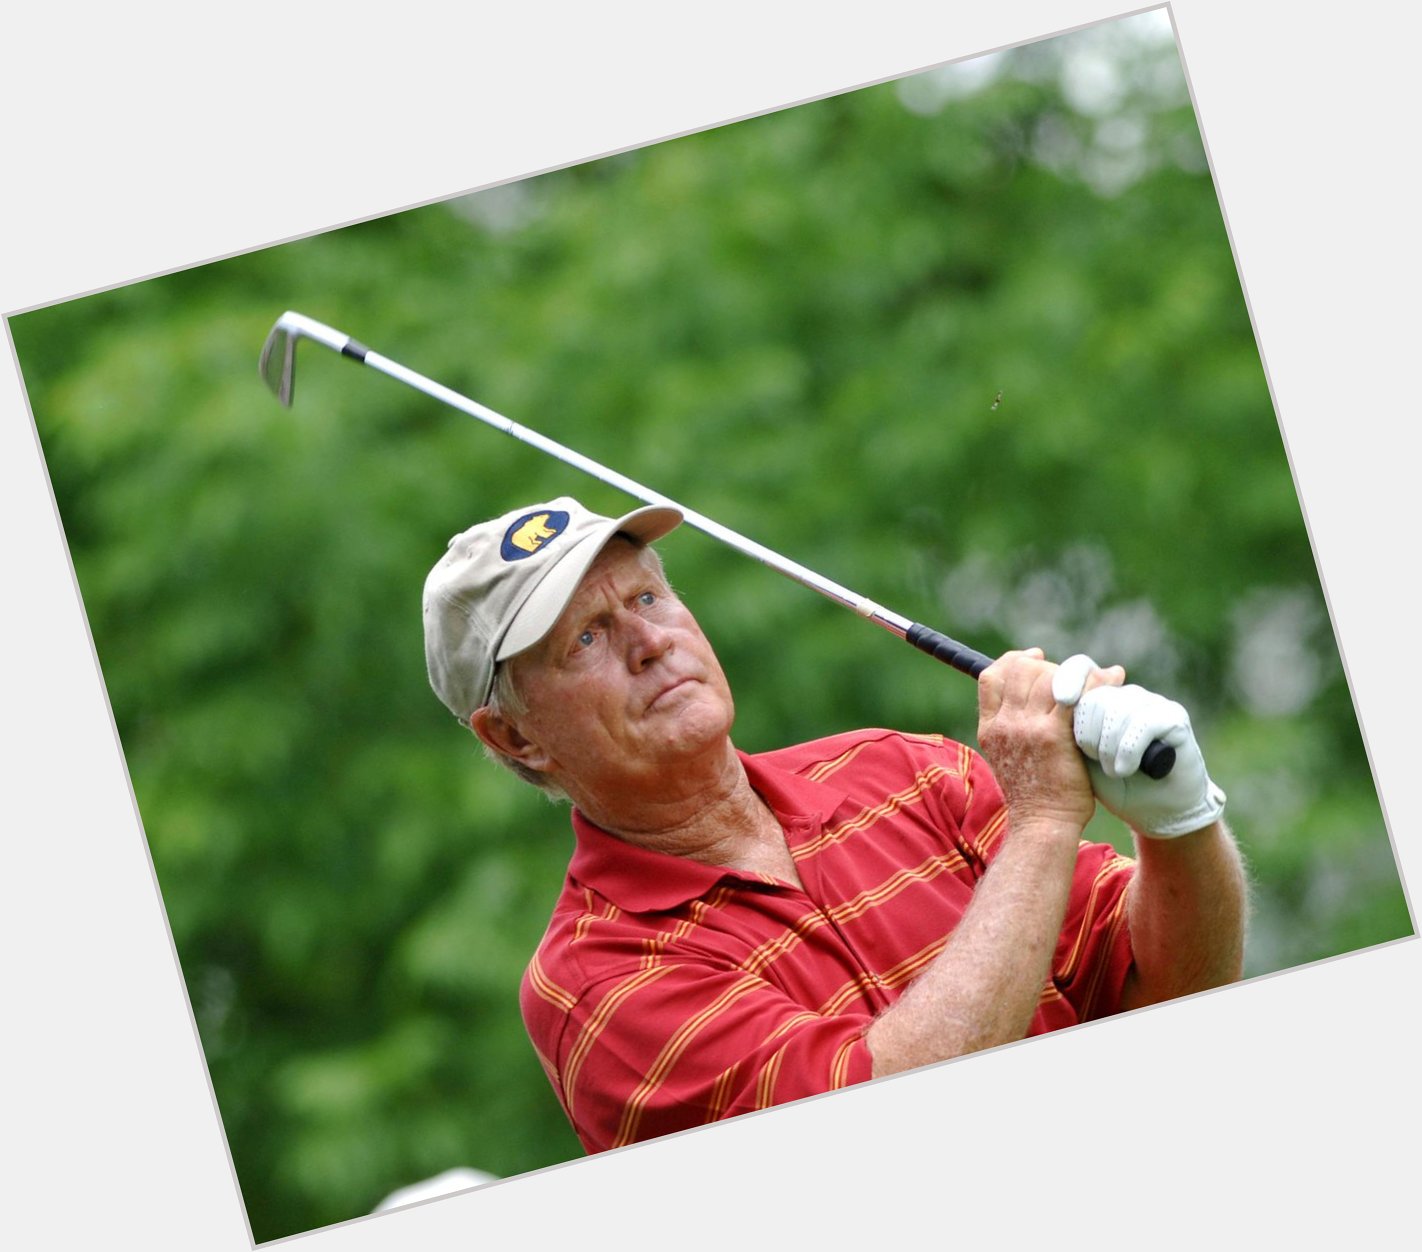 Happy Birthday Jack Nicklaus! To view Jack\s Hall of Fame page go to:  